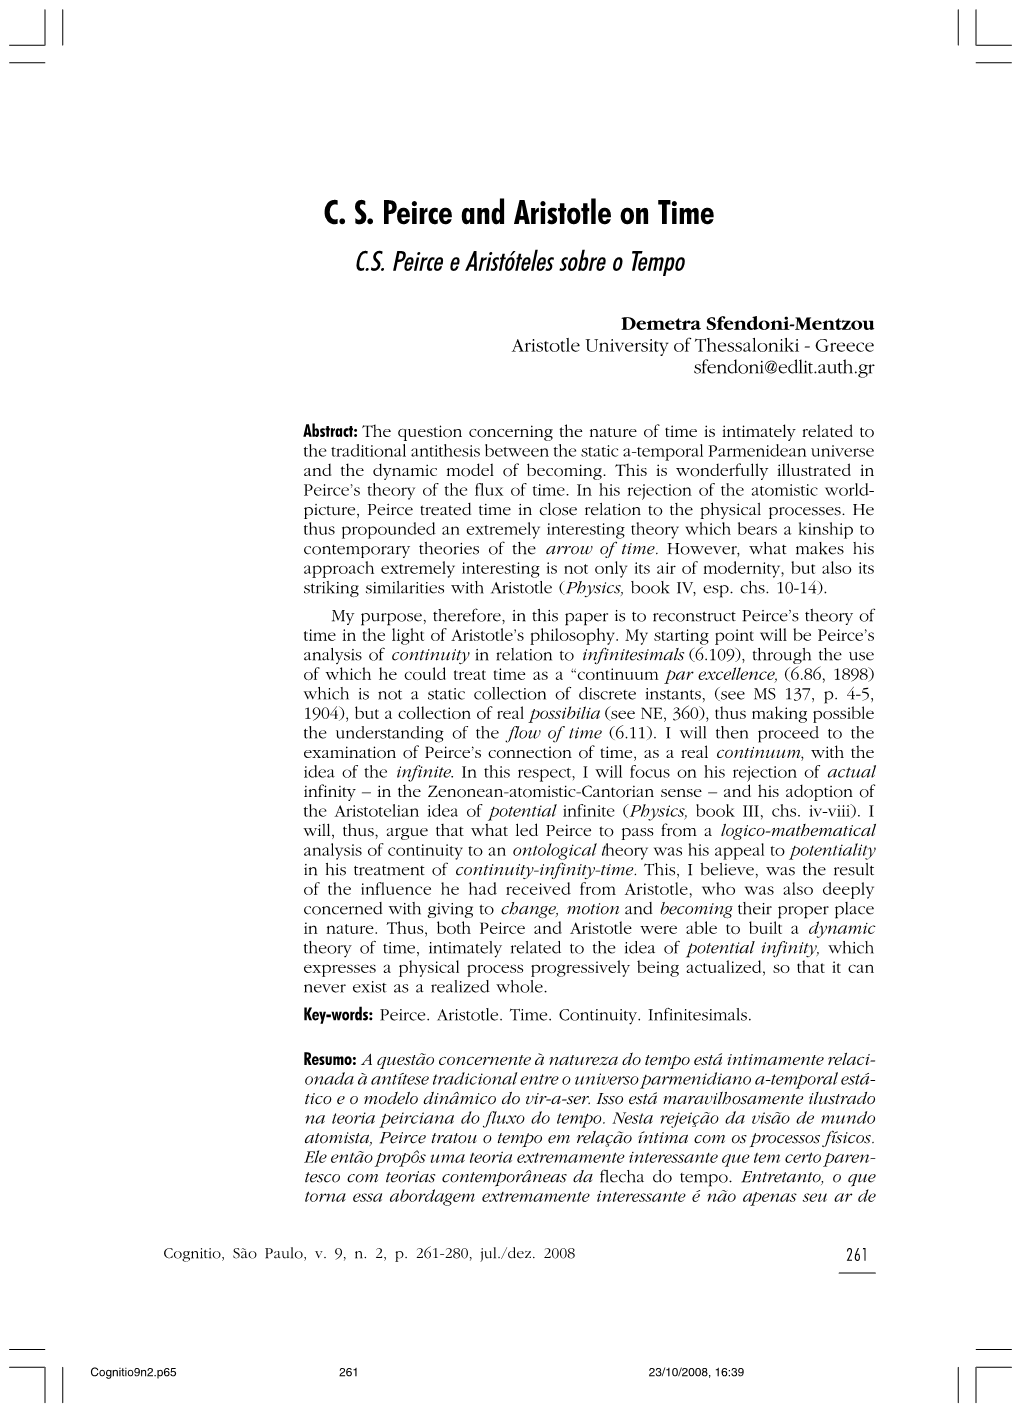 C. S. Peirce and Aristotle on Time C.S